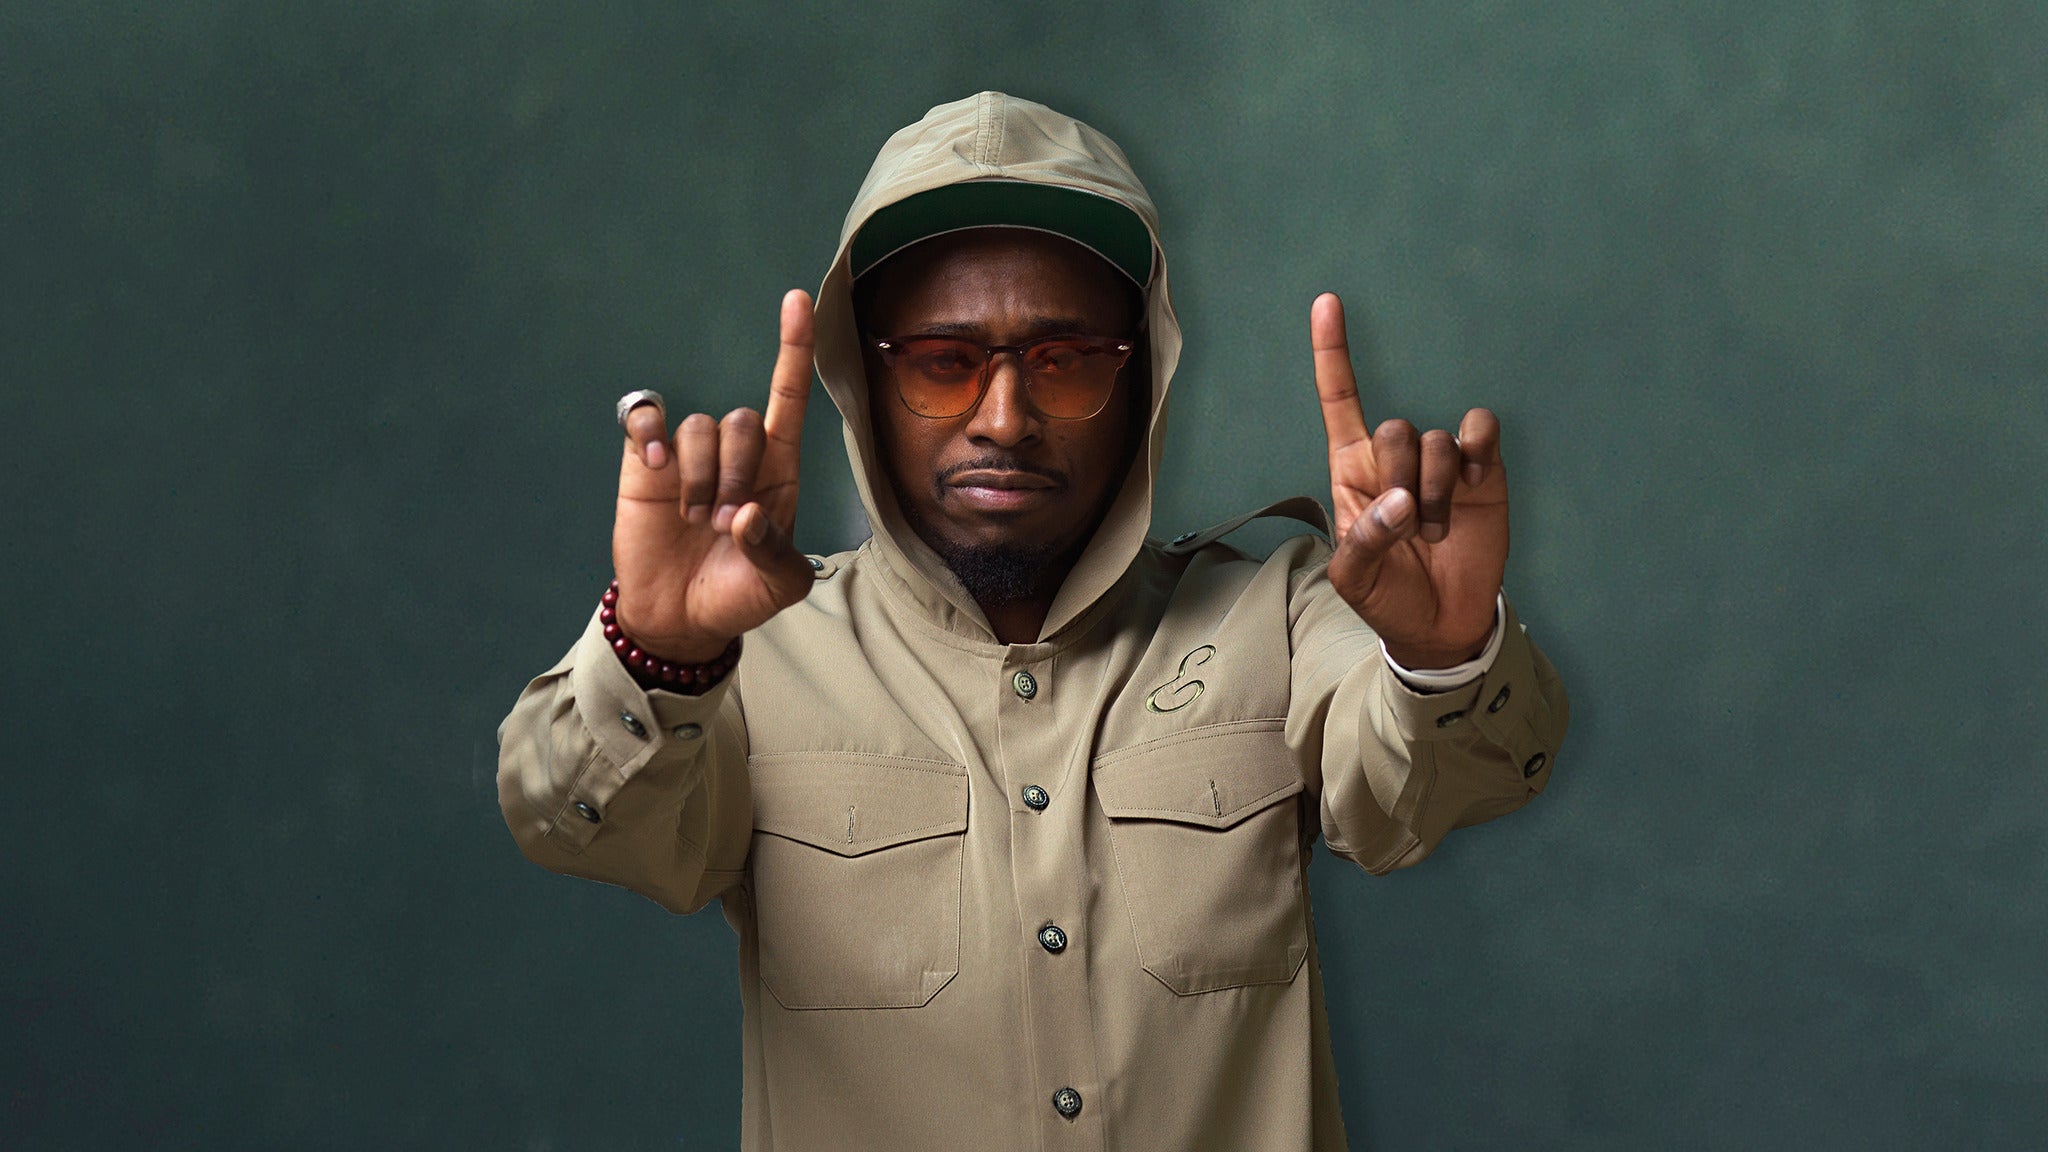 An Evening With Eddie Griffin presale password for show tickets in Stateline, NV (South Shore Room at Harrah's Lake Tahoe)